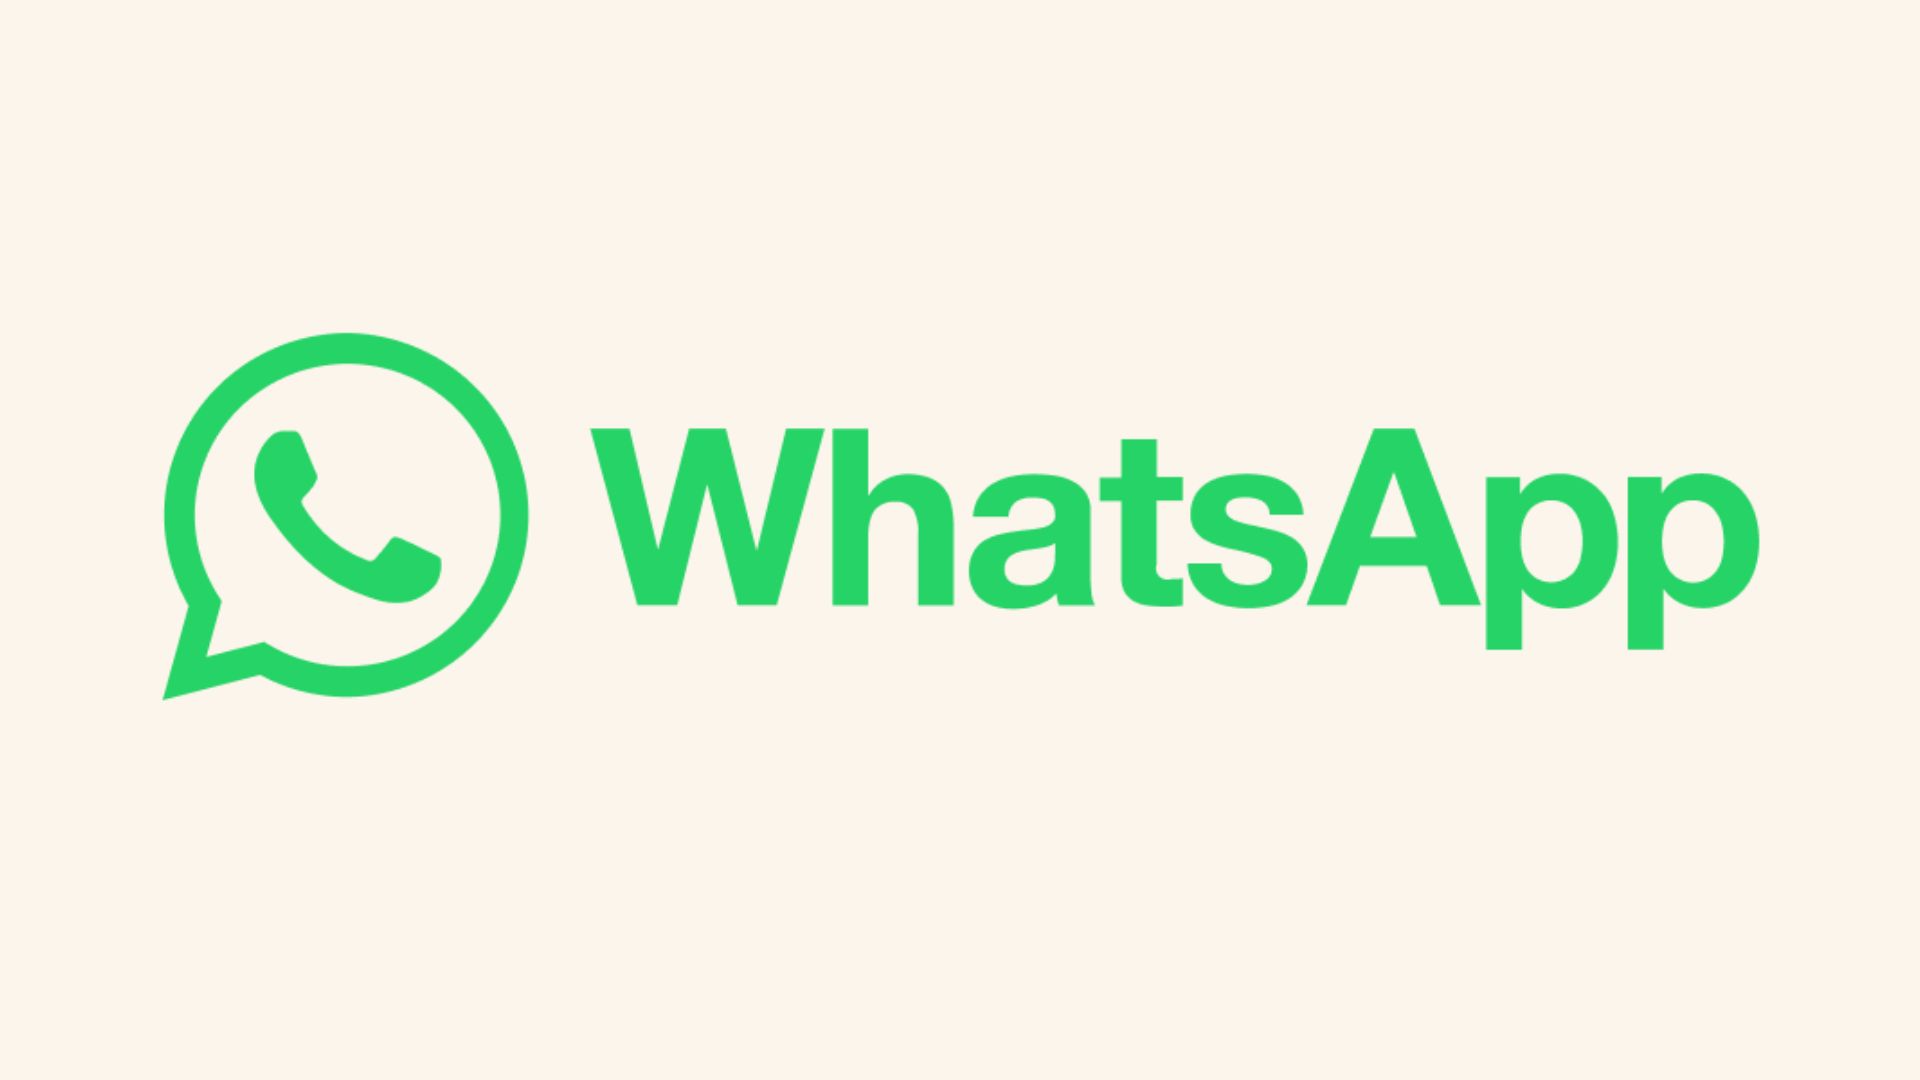 WhatsApp Will Allow to Send 100 Photos Avatars Stickers More